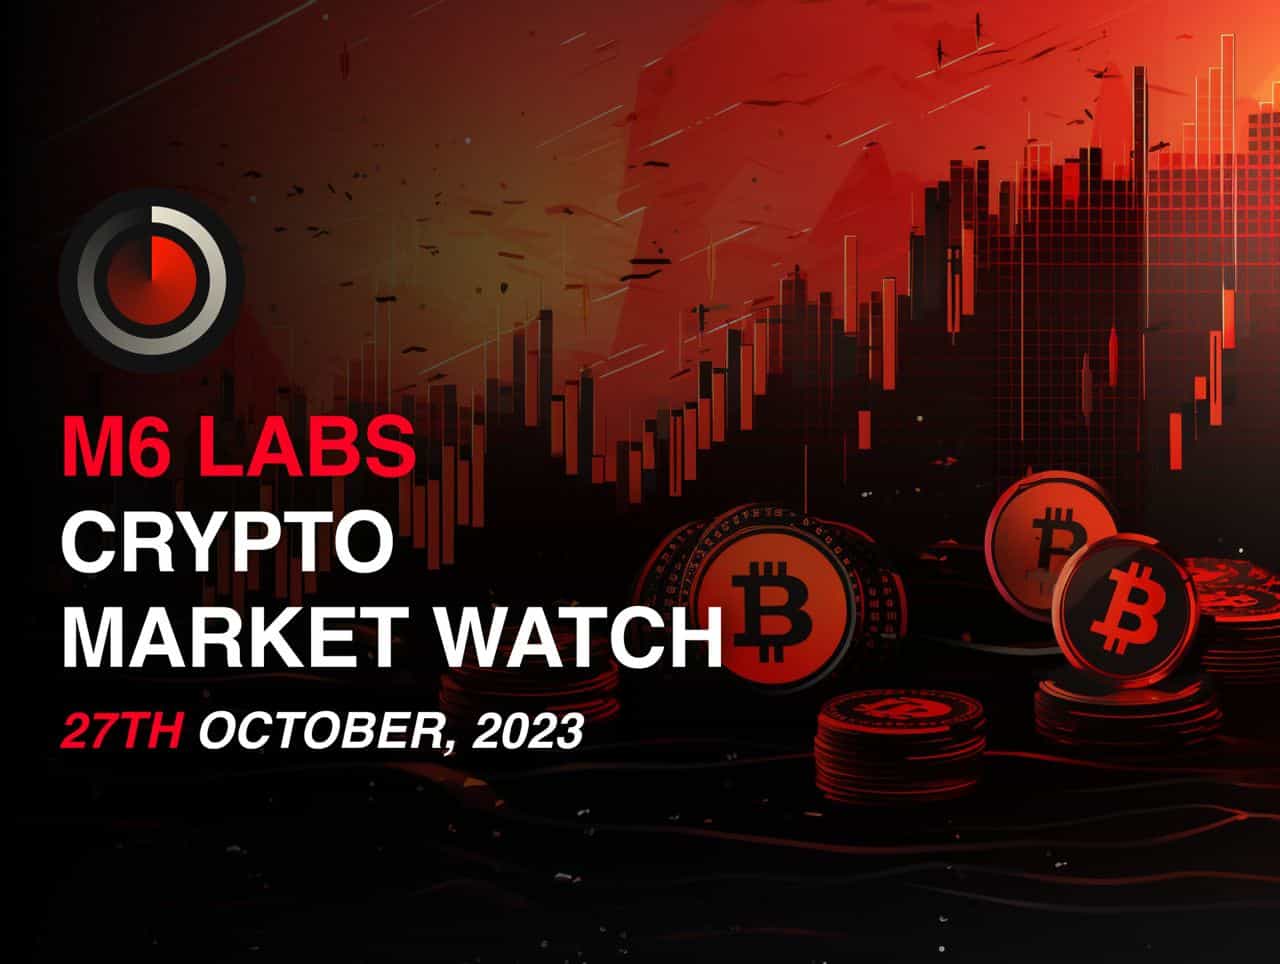 M6 Labs Crypto Market Watch October 27, 2023